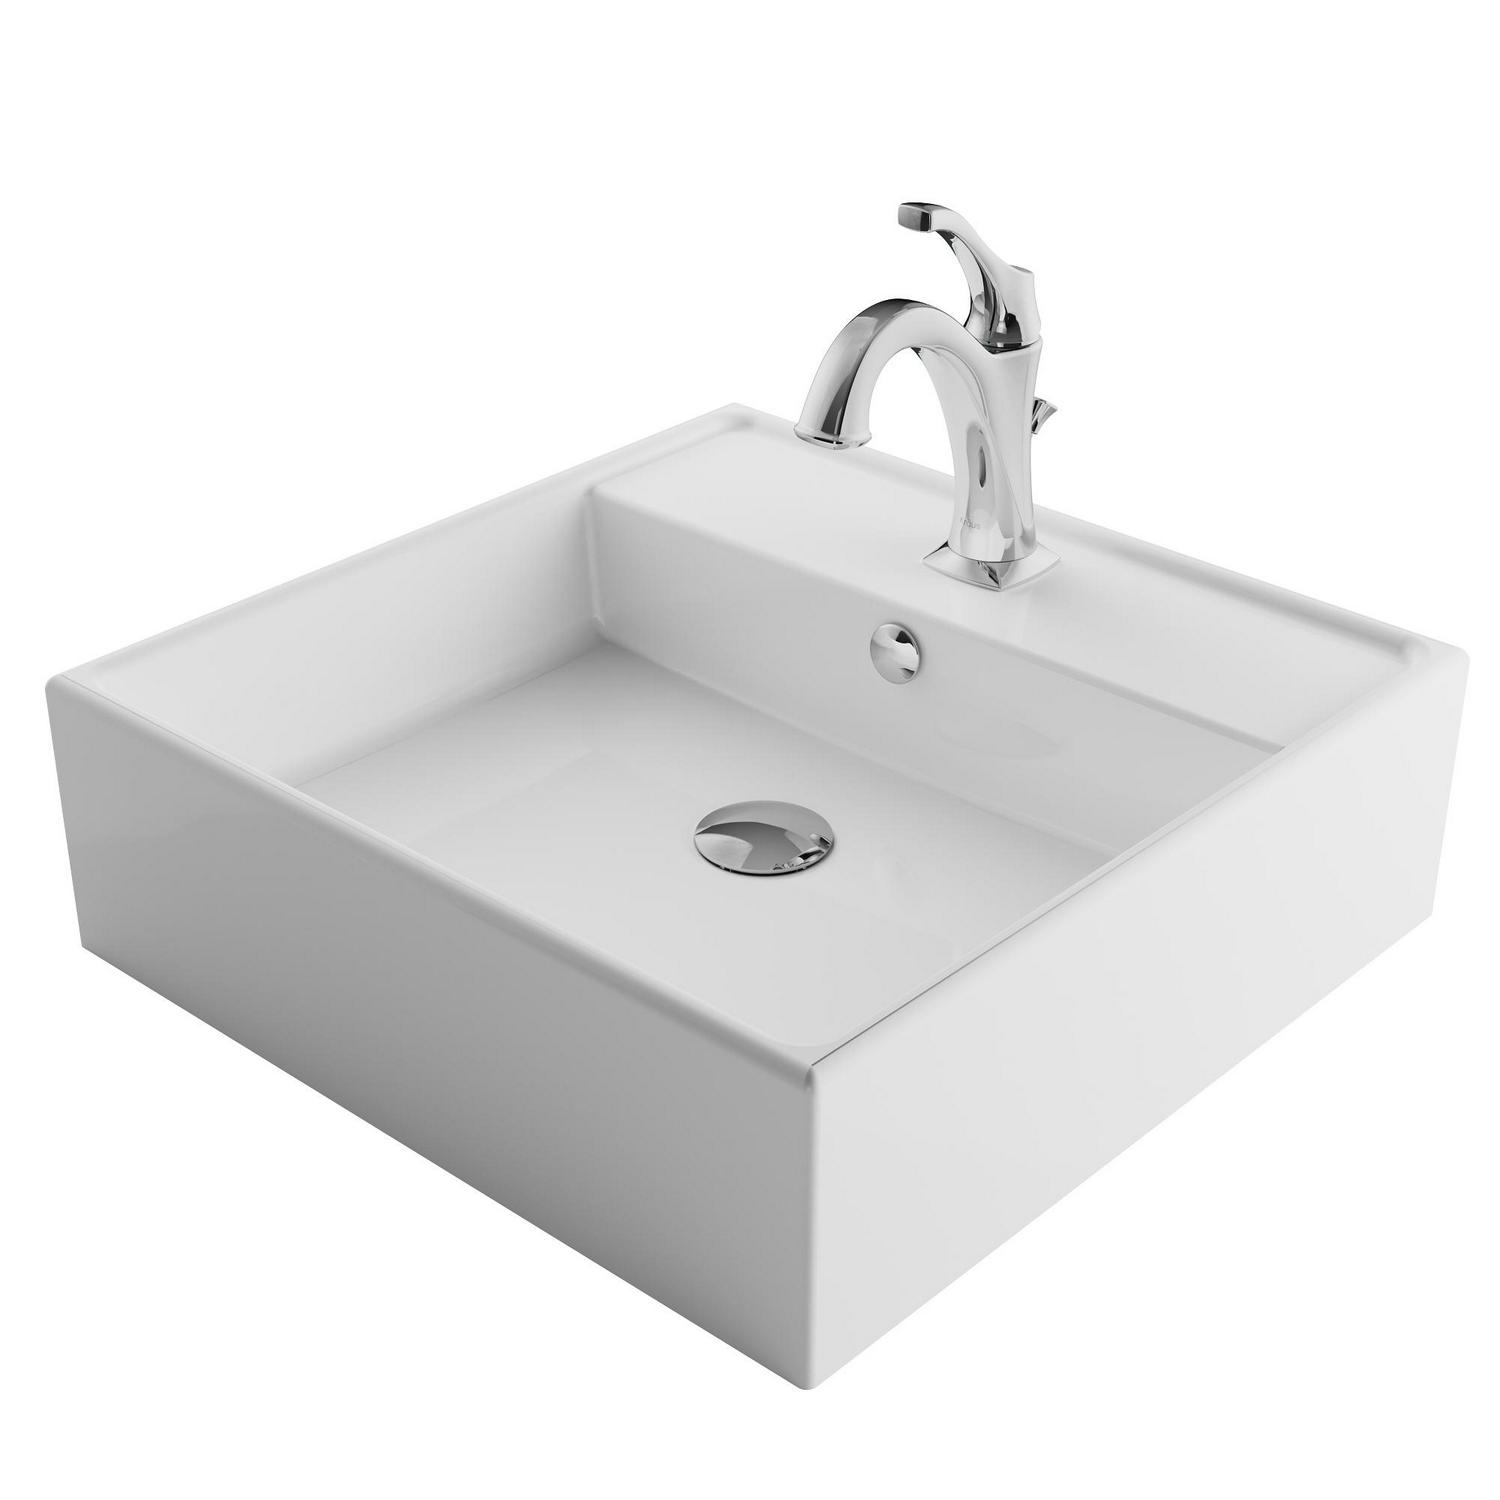 KRAUS Elavo 18 1/2-inch Square White Porcelain Ceramic Bathroom Vessel Sink with Overflow and Arlo Faucet Combo Set with Lift Rod Drain， Chrome Finish